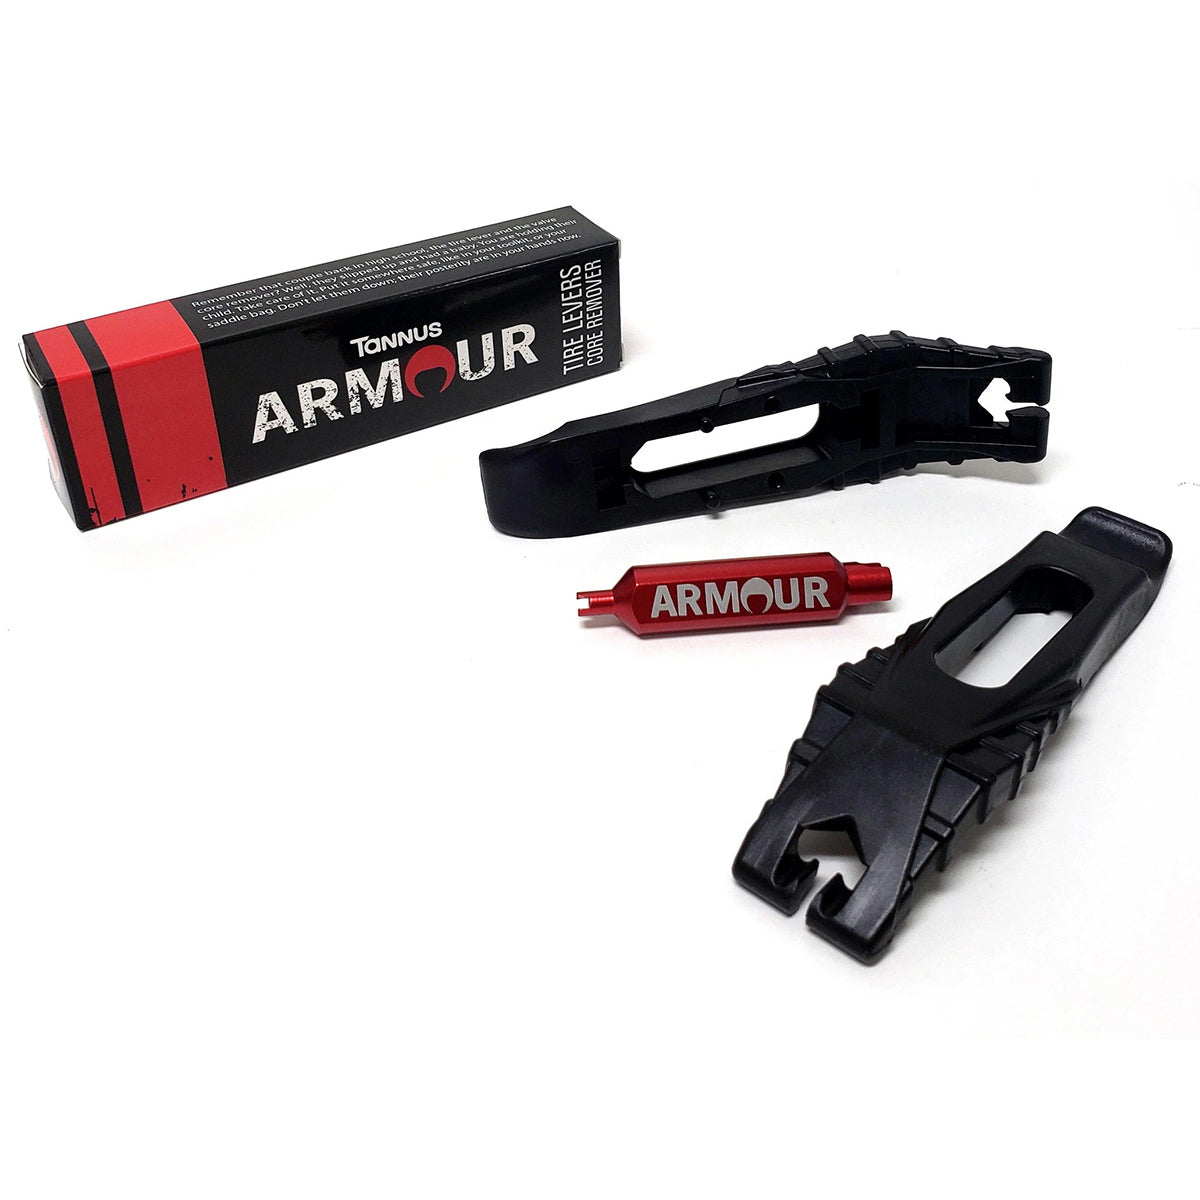 Tannus Armour Tyre Levers With Valve Core Remover